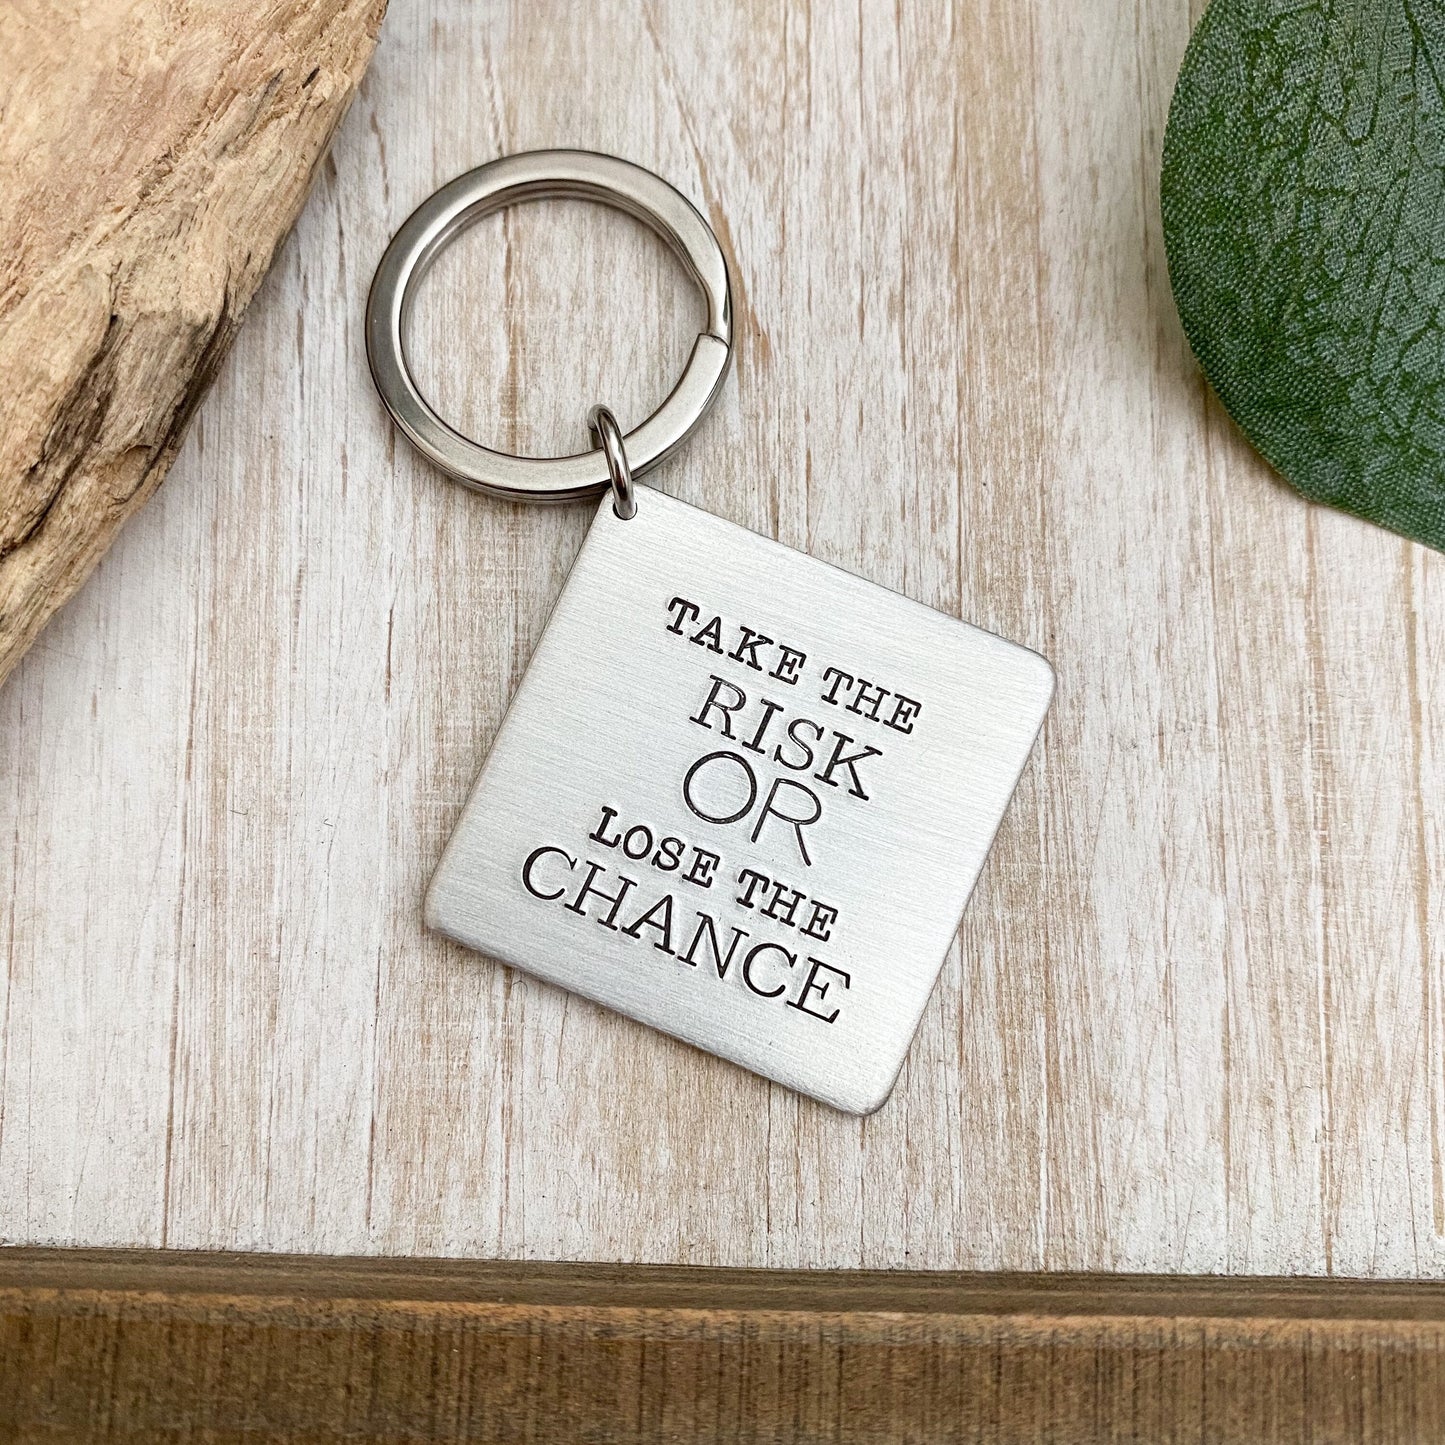 Take the risk or lose the chance keychain, I can do all things, Motivational Gift, Inspirational Quote, Goal Digger,  Be Determined